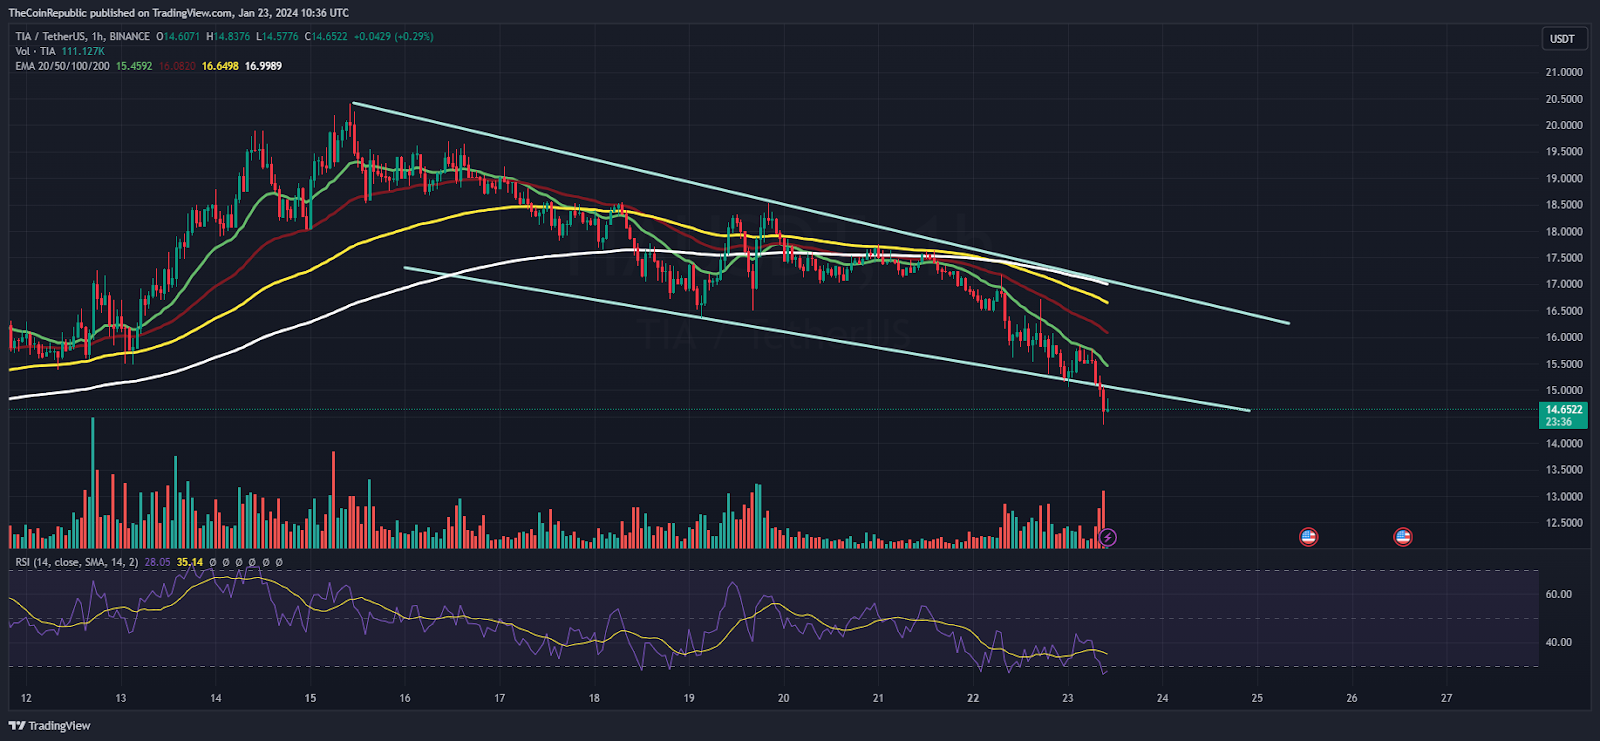 TIA Crypto Price is at Make or Break Zone of $15; What’s Next?